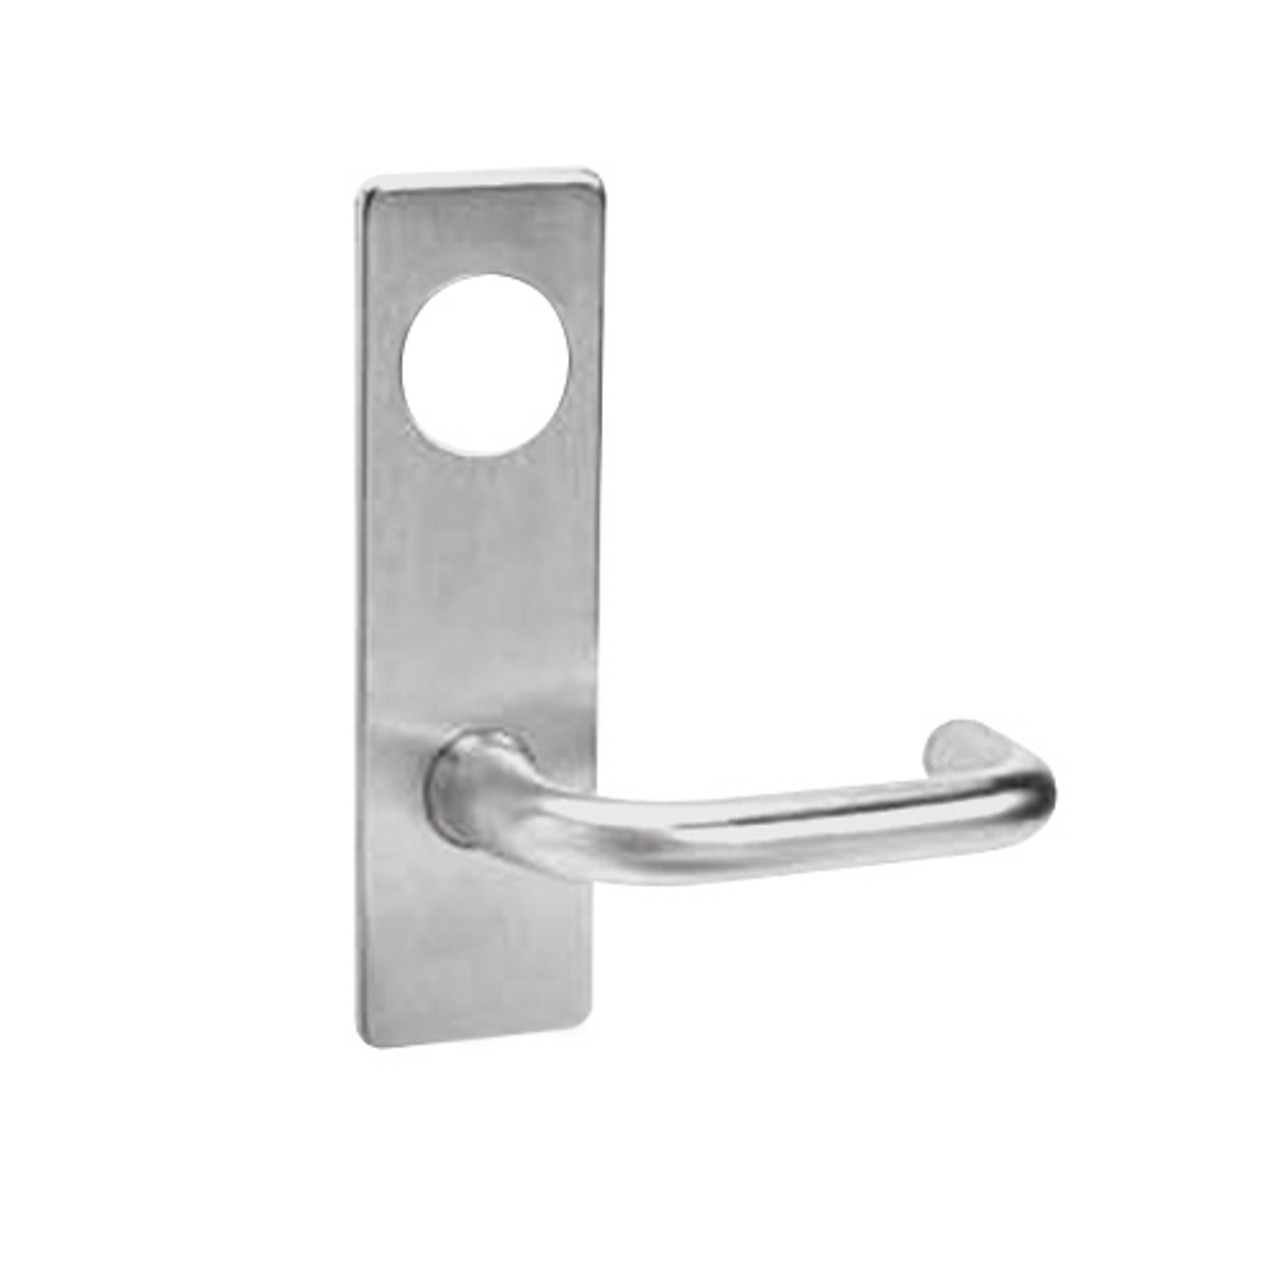 ML2022-LWM-630 Corbin Russwin ML2000 Series Mortise Store Door Locksets with Lustra Lever with Deadbolt in Satin Stainless